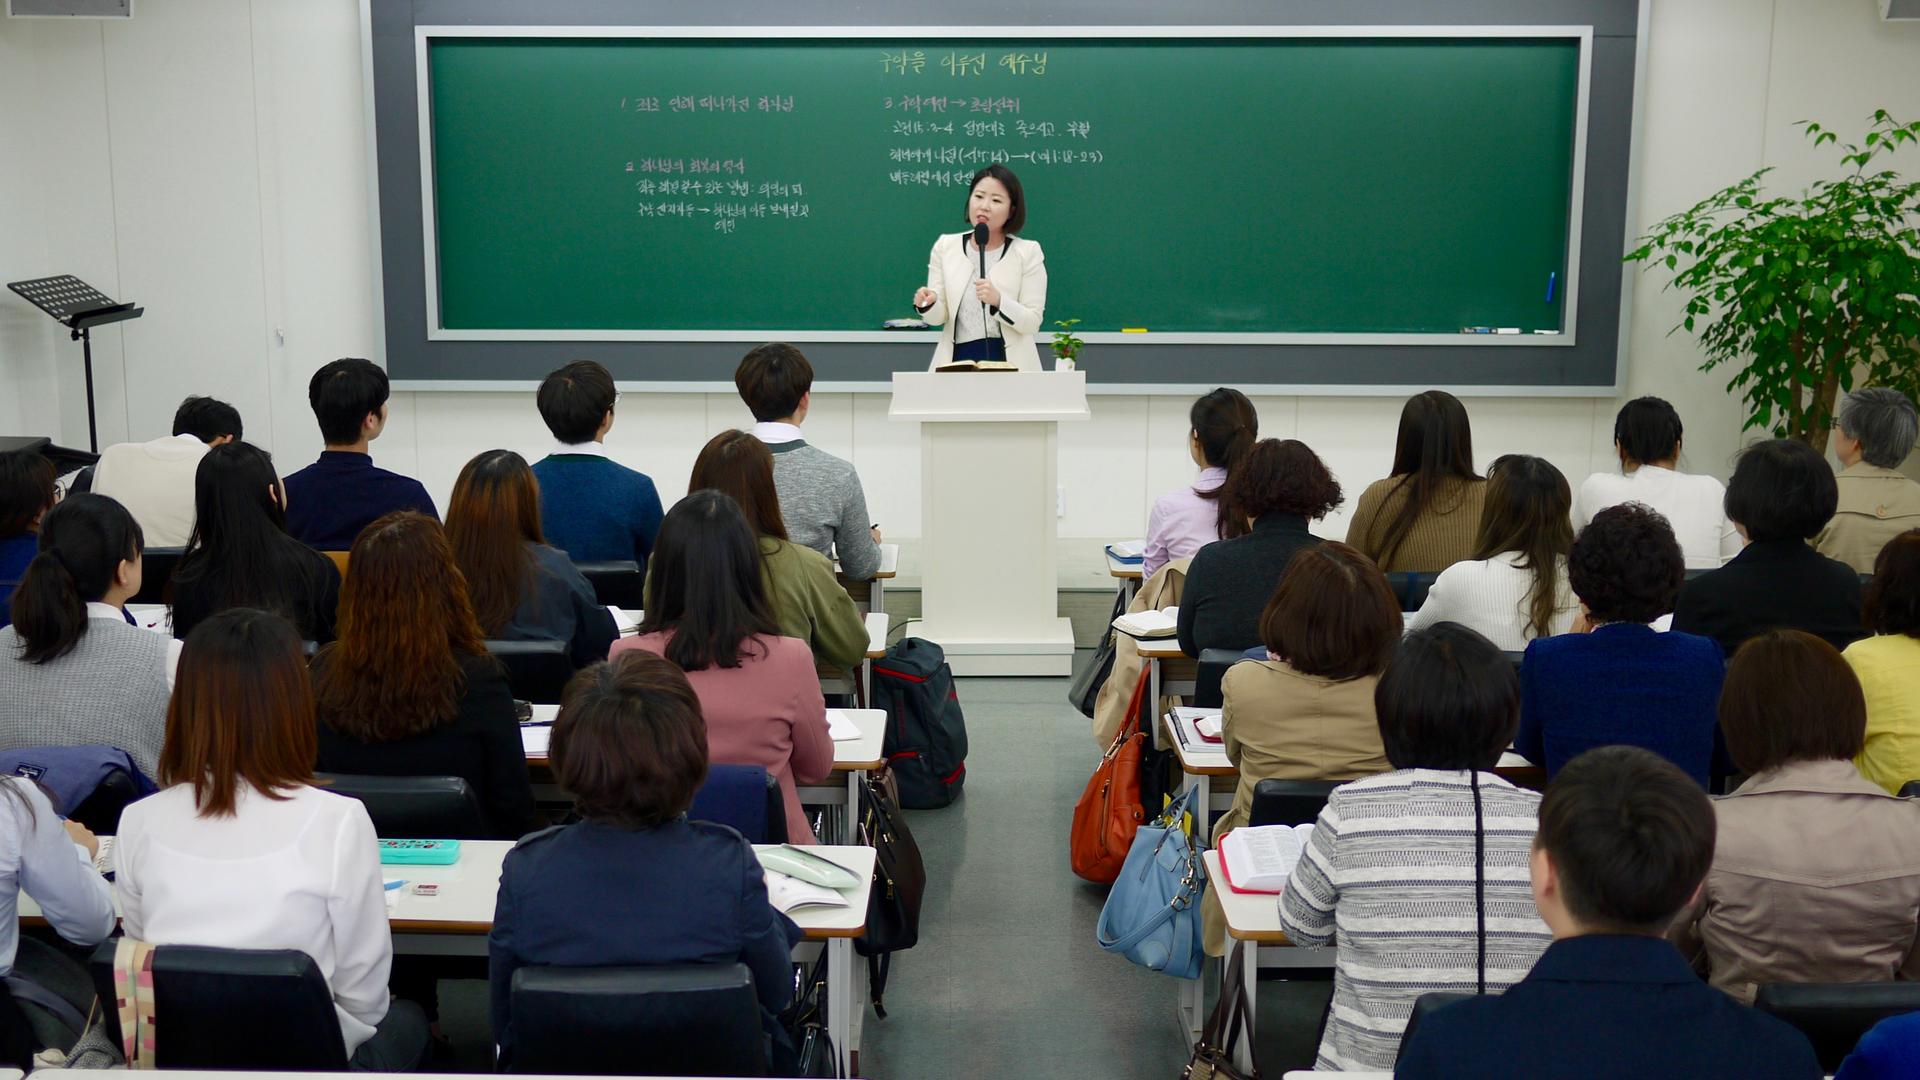 When people first sign up for Bible study classes offered by Shinchonji, they are not told about the affiliation with the controversial religious group. This Bible study center, for example, does not advertise itself as part of Shinchonji.